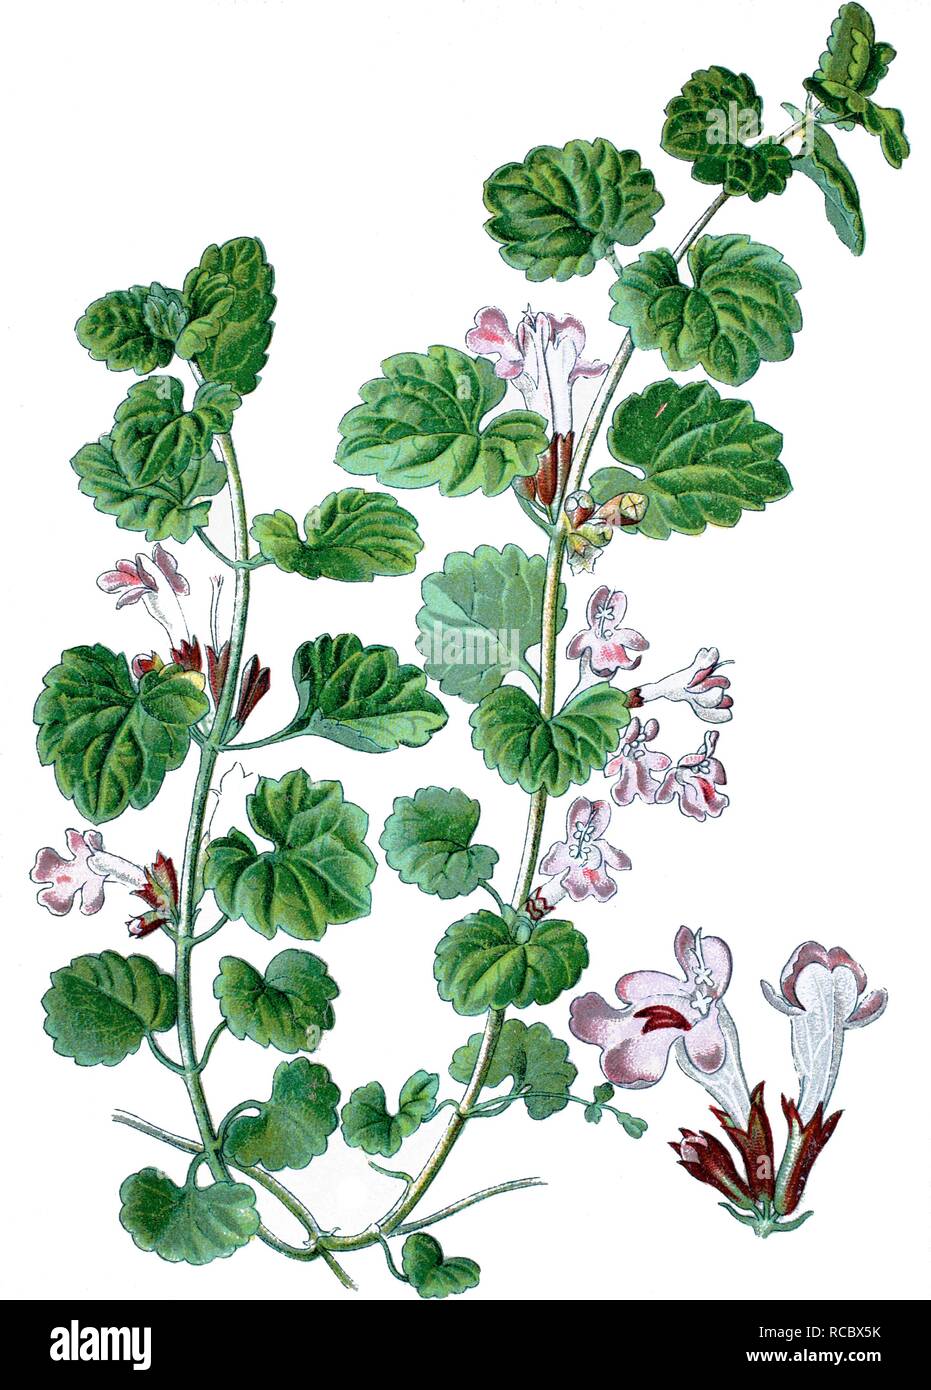 Ground-ivy, gill-over-the-ground (Glechoma hederacea), medicinal plant, historical chromolithography, 1870 Stock Photo